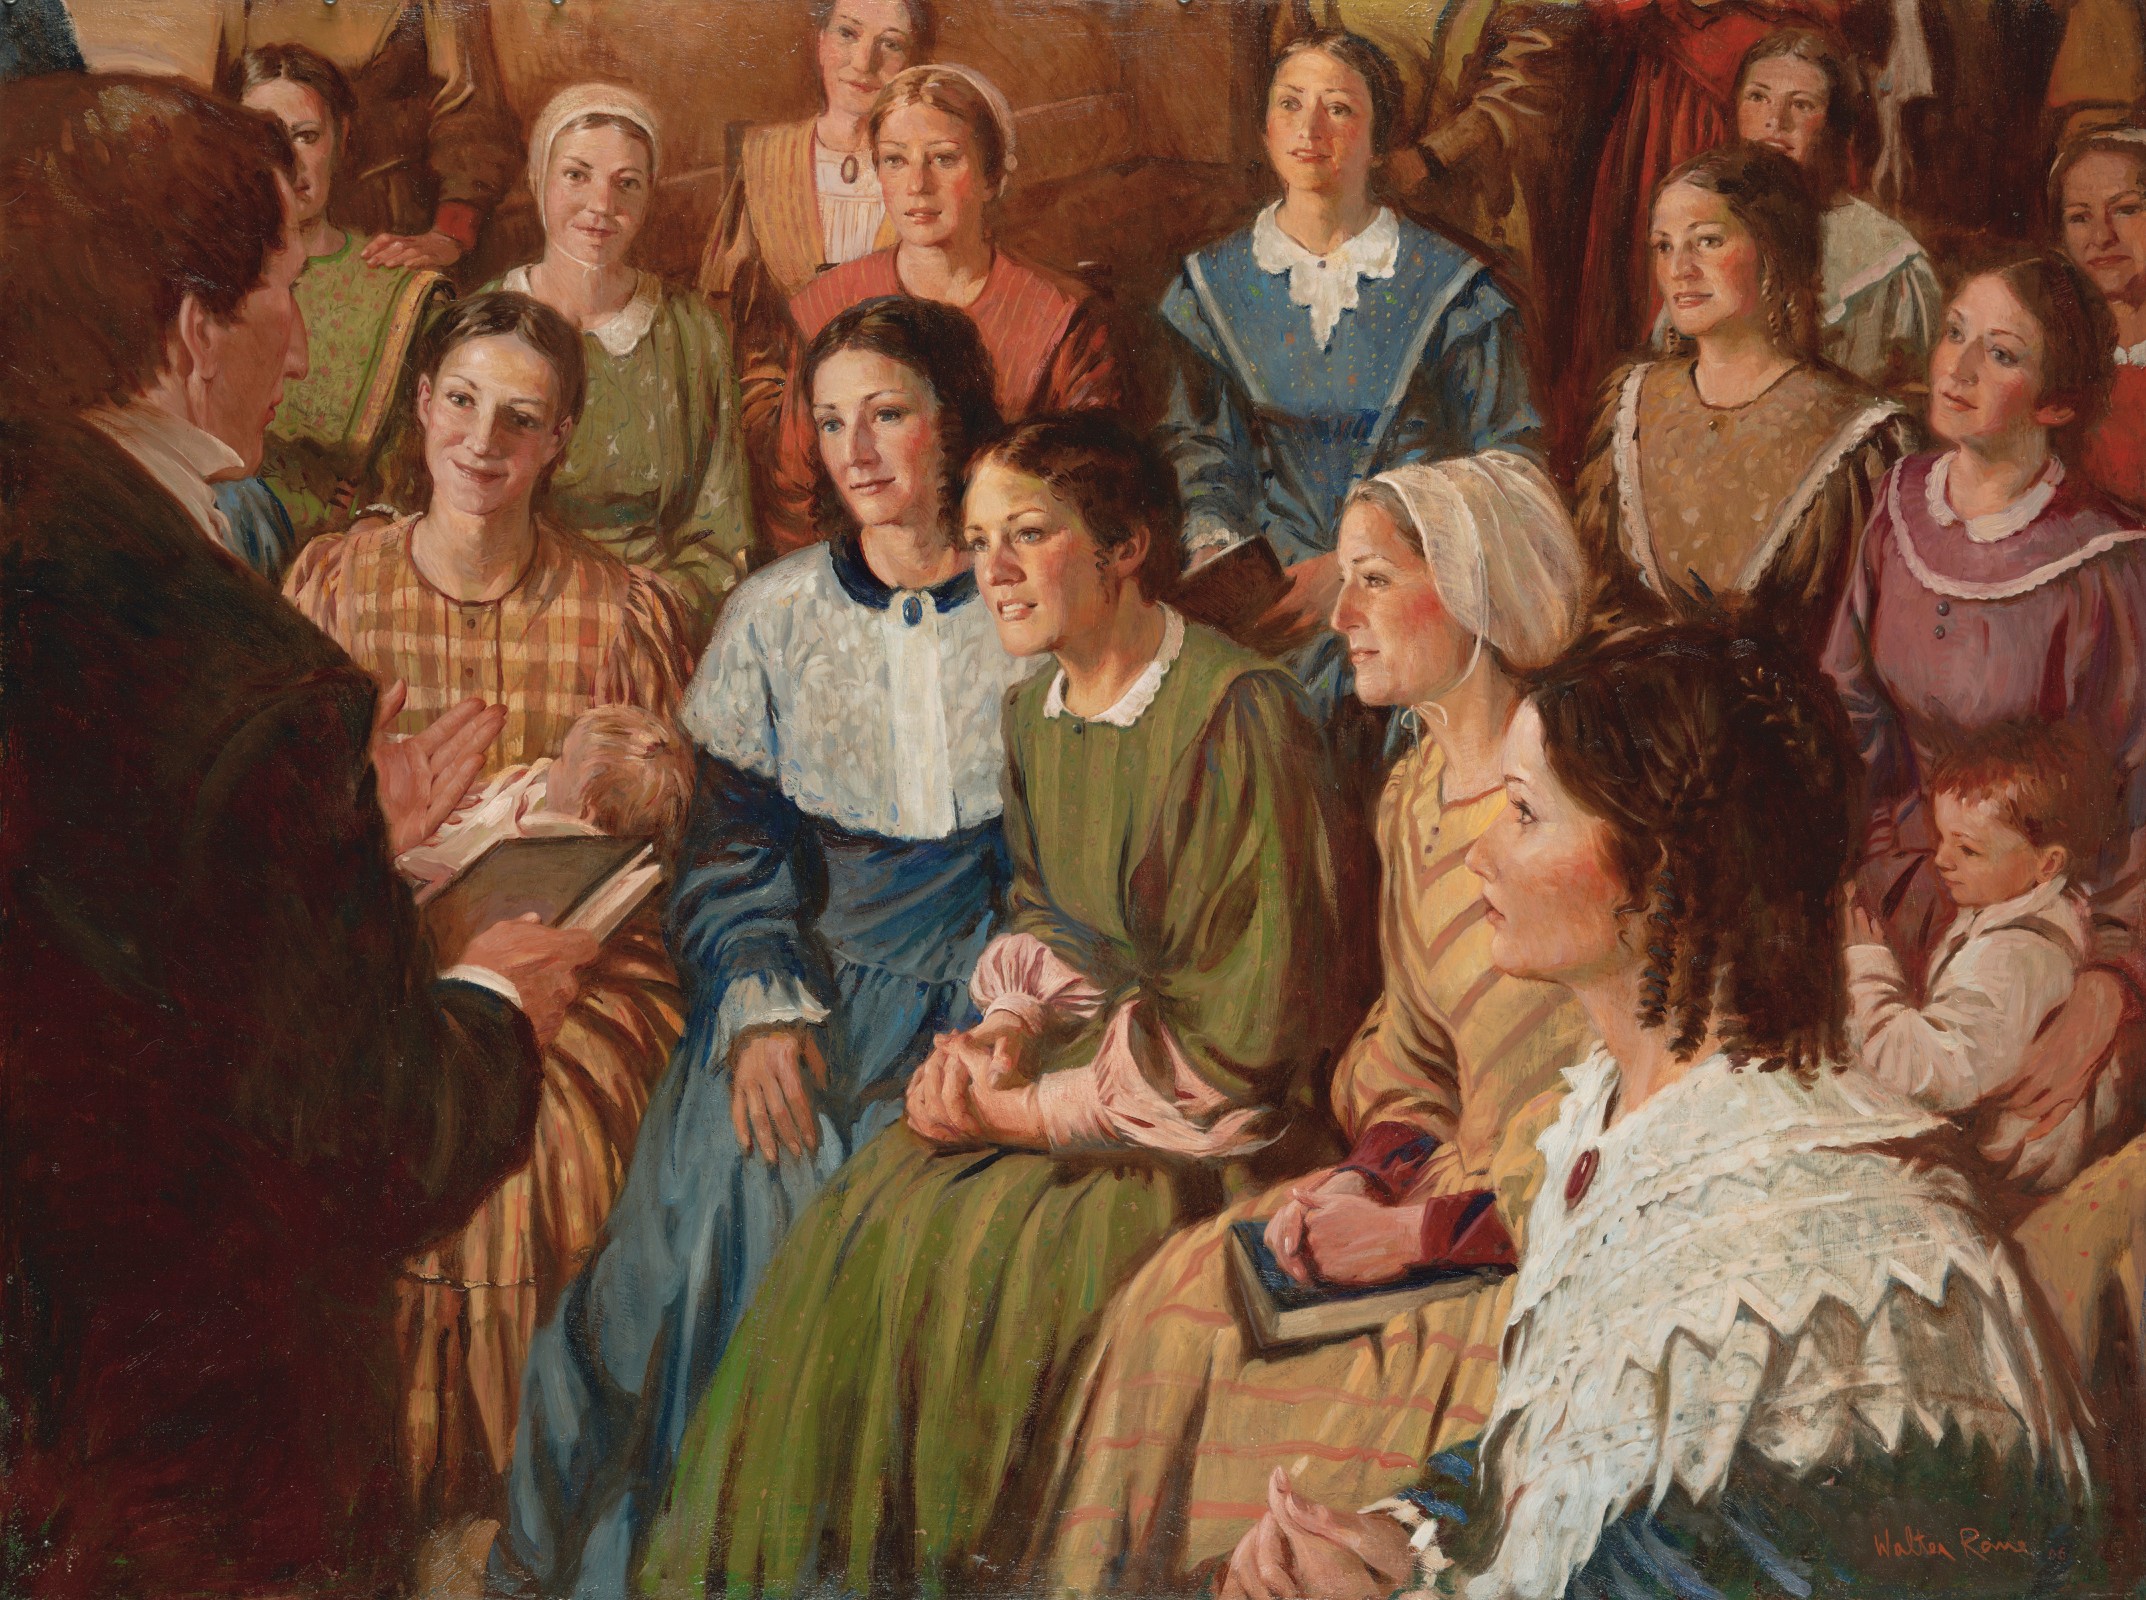 Painting depicts Joseph (seen in profile wearing a black/brown coat and a white shirt and holding a book in his right hand) speaking to a large group of women.  There are five women seated in the front row, six women in the second row, three women in the third row and four figures standing in the back that are only partially visible.   From left to right front row:  a Woman in a pale yellow plaid dress, brown center parted hair holding a child; and woman in a blue dress with a large white collar and a ringlet hairstyle; a woman in a green dress with pink under-sleeves leaning slightly forward; and woman in a yellow chevron striped dress with a white cap, woman in a dark dress and a white tiered lace collar with brooch and a ringlet-braid hairstyle.From left to right second row a woman in a green floral dress with a brown centered parted hair with a hand on her shoulder; a woman with a green floral dress with white collar and cap; a woman in a coral colored stripped dress with a cap far back on her head; and woman in a blue print dress with small white lace collar; a woman in a tan floral dress with light brown ringlets; and a woman in a pink dress with a small boy on her lap. Third row from left to right: a woman in a yellow stripped dress with a white inset and brooch, a woman in a pale blue dress with center parted hair and a woman in an orange/pink dress with a cap.  Standing are a figure in blue (arm only ) a woman in a brown dress with red cuffs(hand on the shoulder of the woman seated in front of her) and woman in a olive colored dress with a green stripe and a figure in a red dress. Lower red corner reads, "Walter Rane" in red.